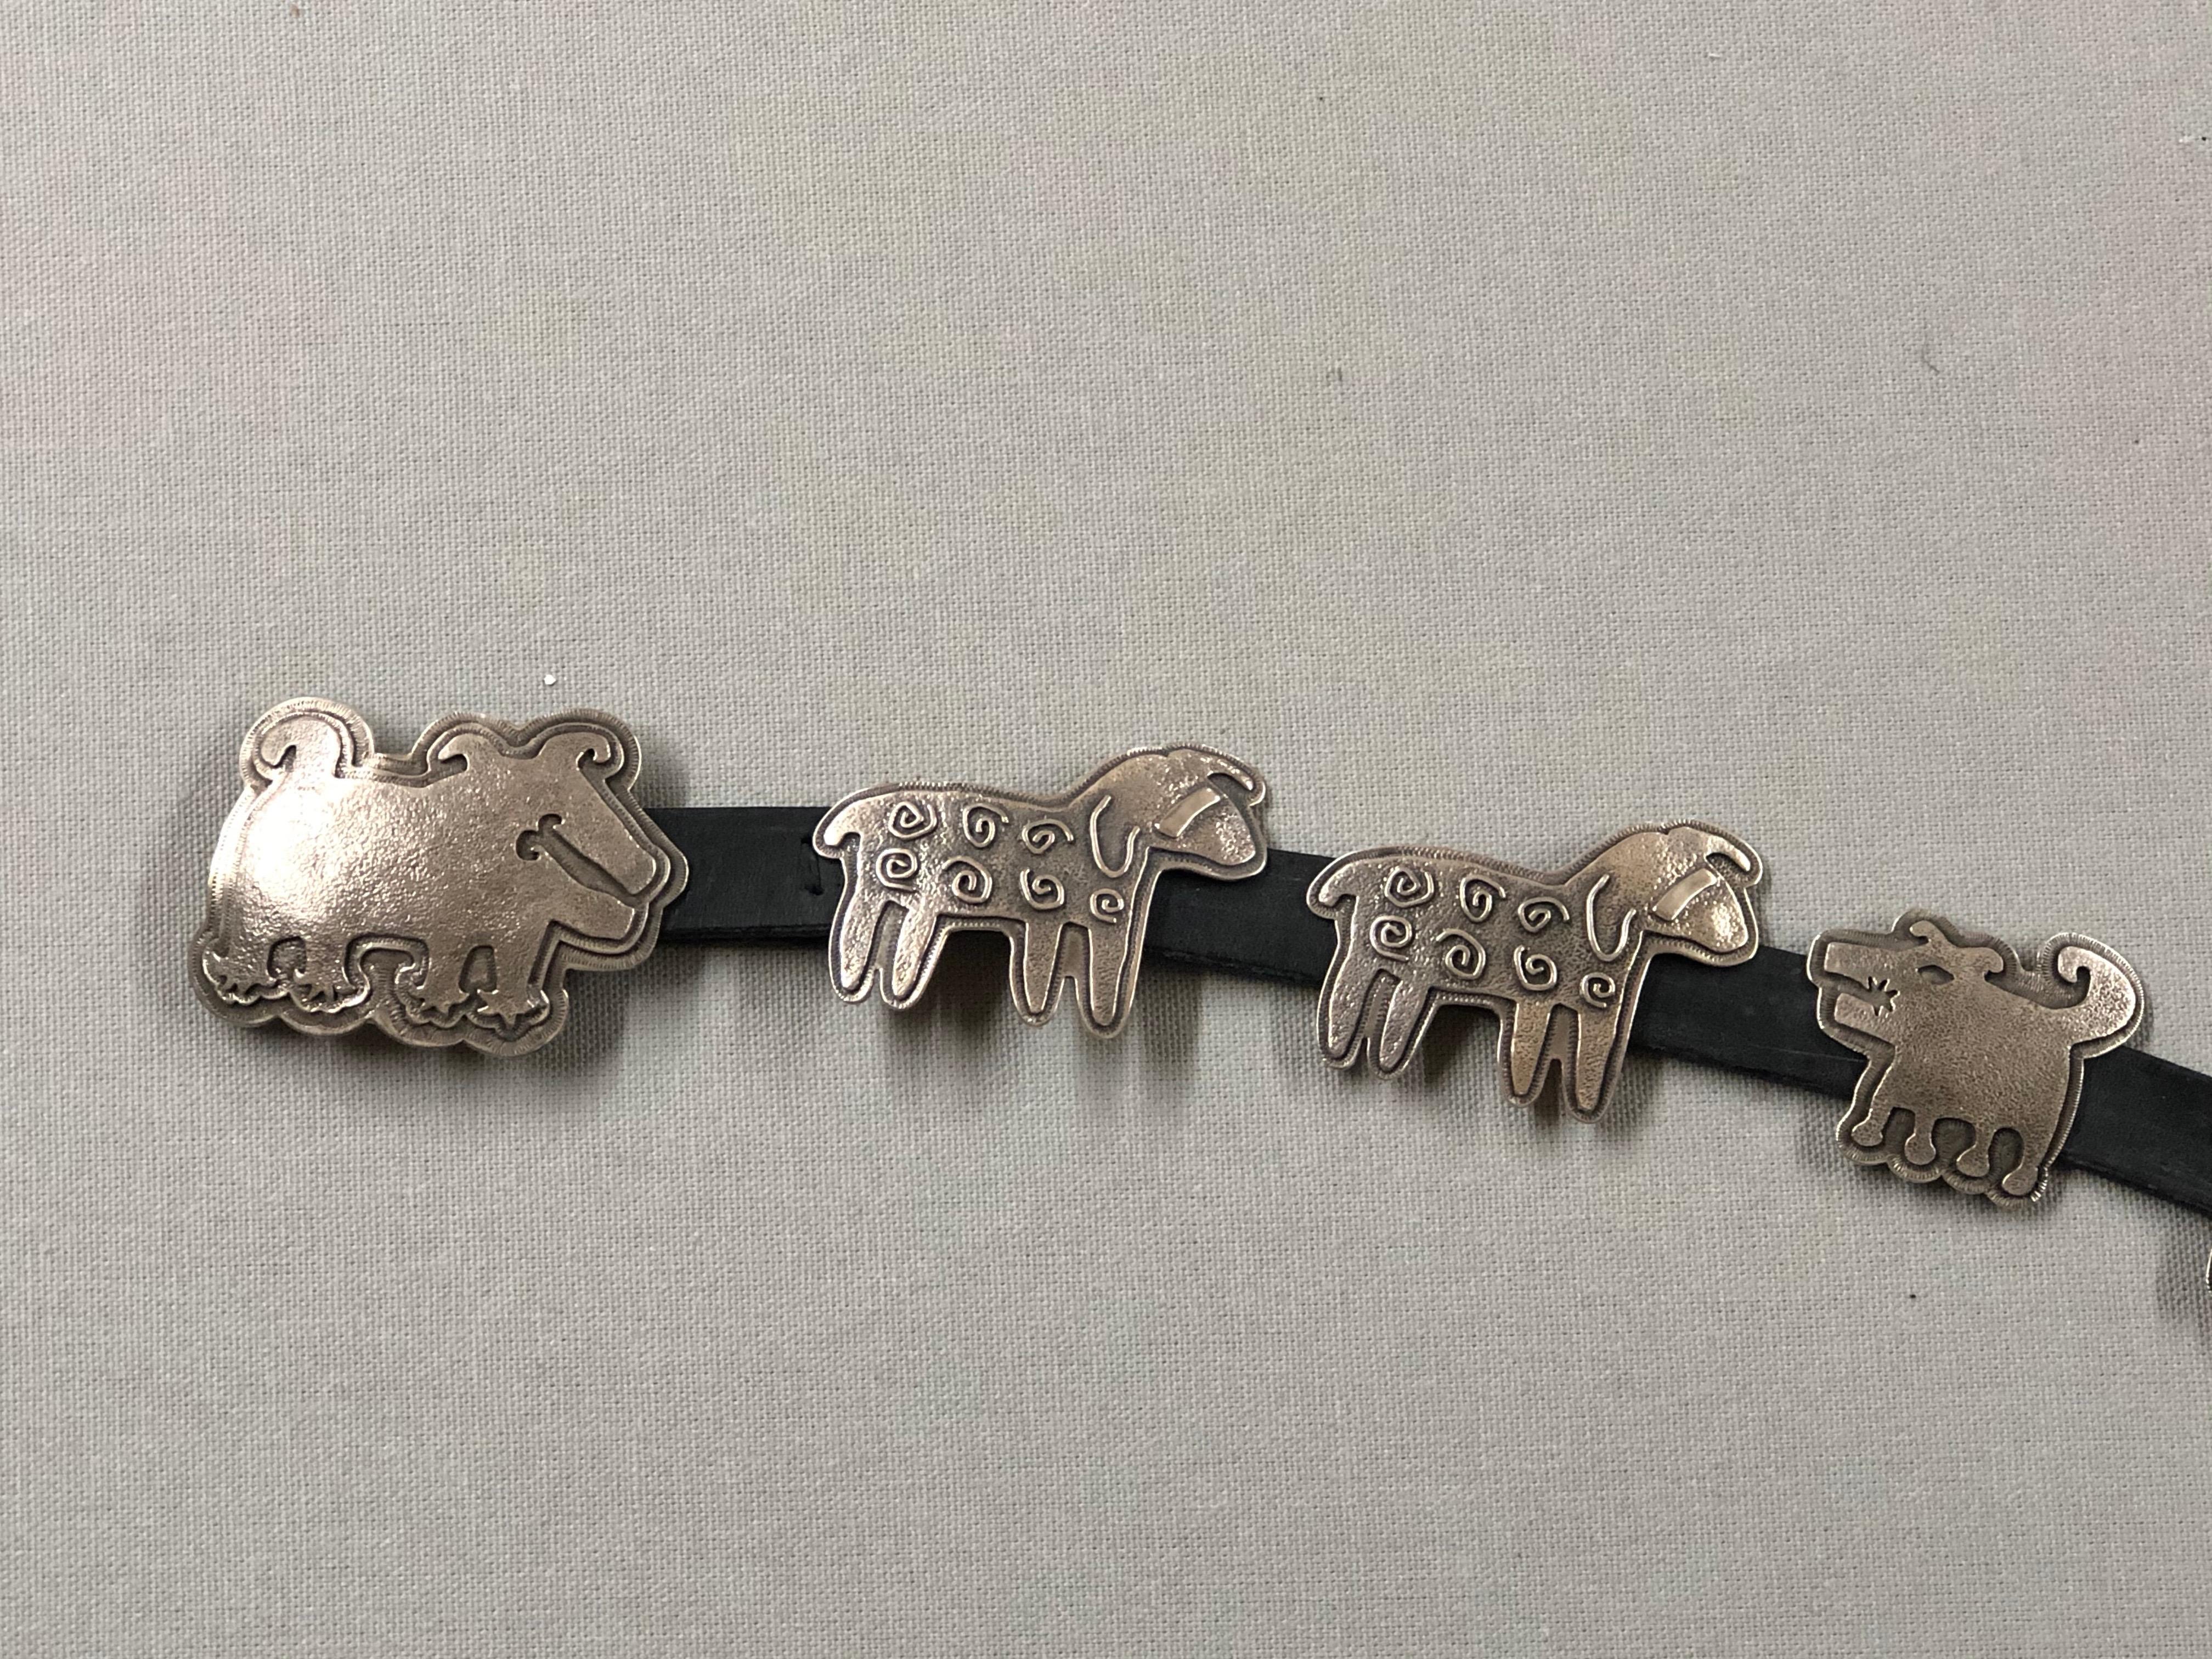 Wide Ruins Gang Concho Belt designed by Melanie Yazzie, cast sterling silver dogs, ram and sheep and leather strap. The strap is not punched. Customers' measurements need to be provided for proper sizing. 

Melanie A. Yazzie (Navajo-Diné) is a